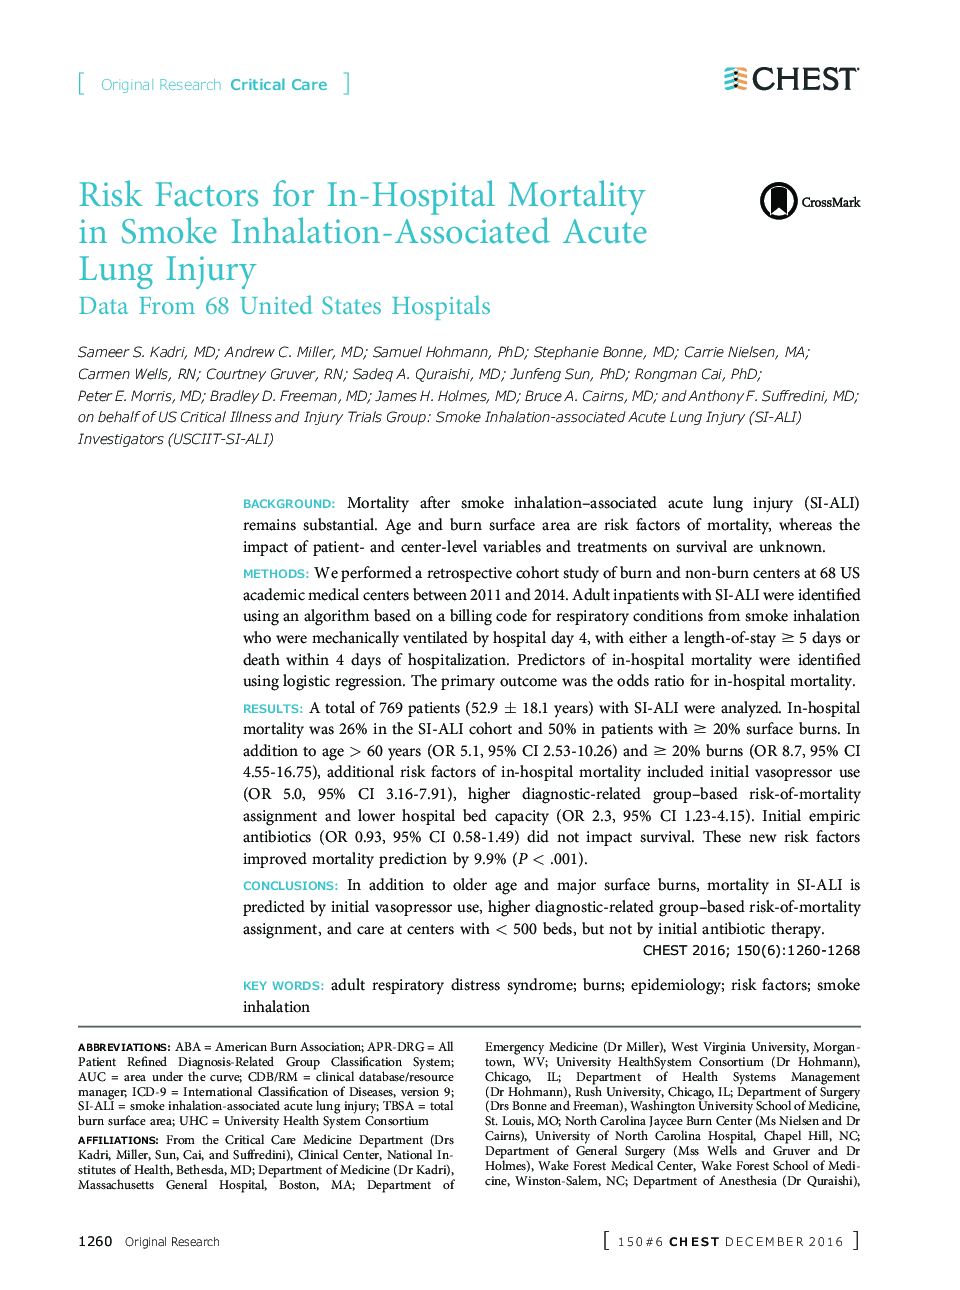 Risk Factors for In-Hospital Mortality in Smoke Inhalation-Associated Acute Lung Injury